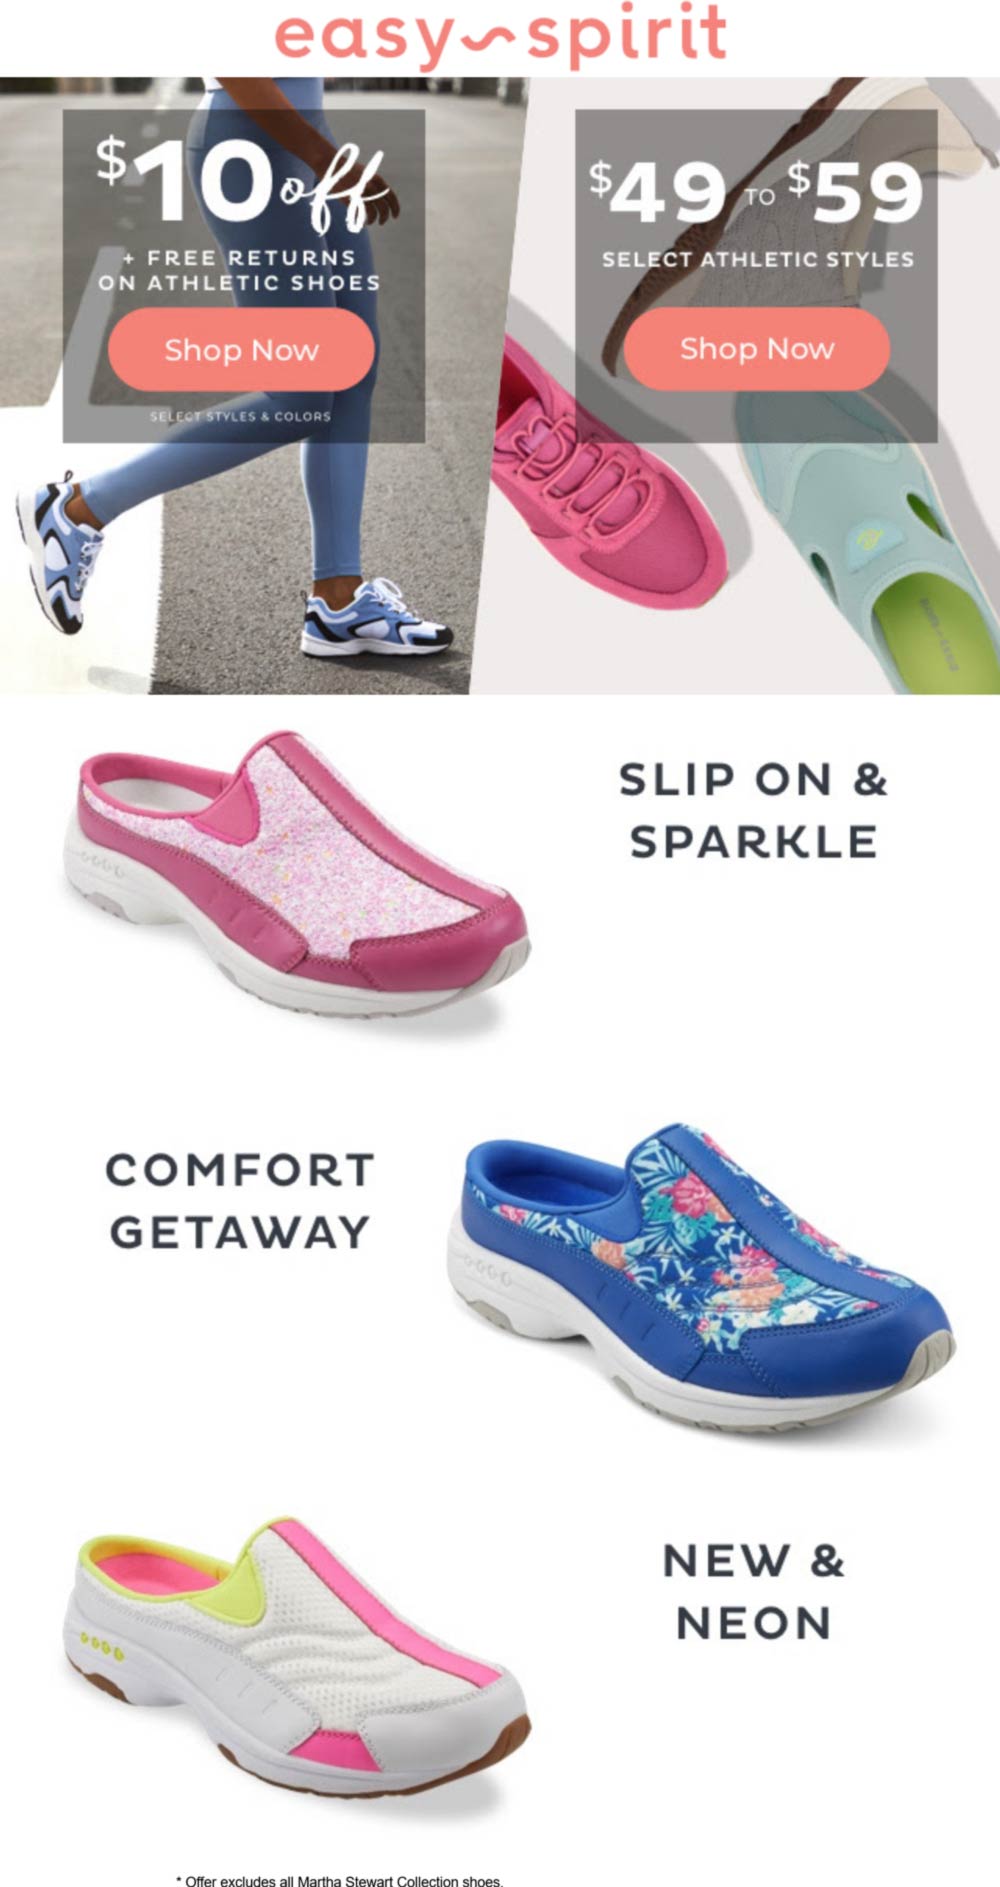 Easy Spirit stores Coupon  $10 off athletic shoes at Easy Spirit #easyspirit 